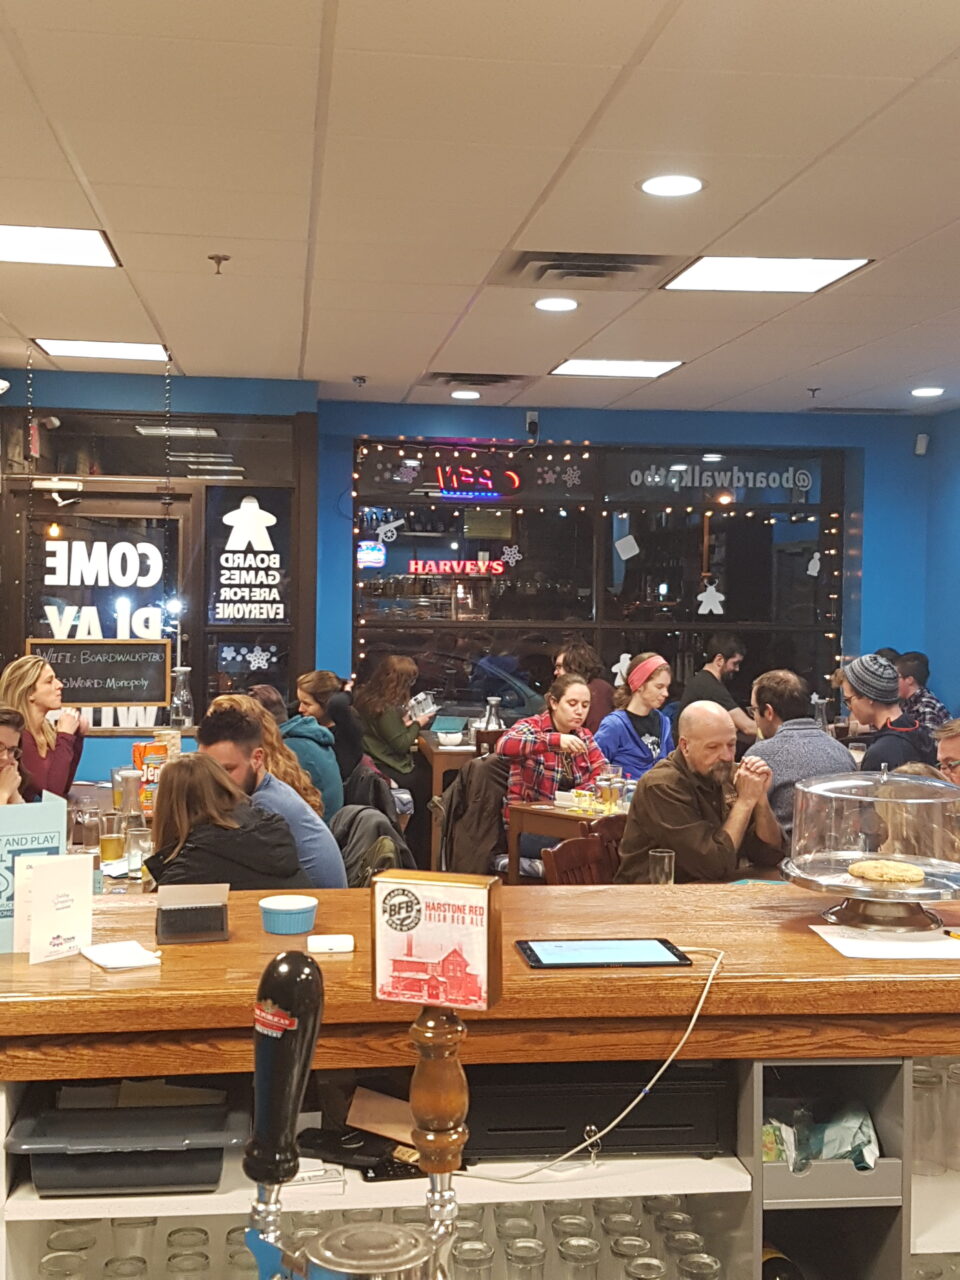 view from the bar of a packed room of people playing board games, eating and drinking